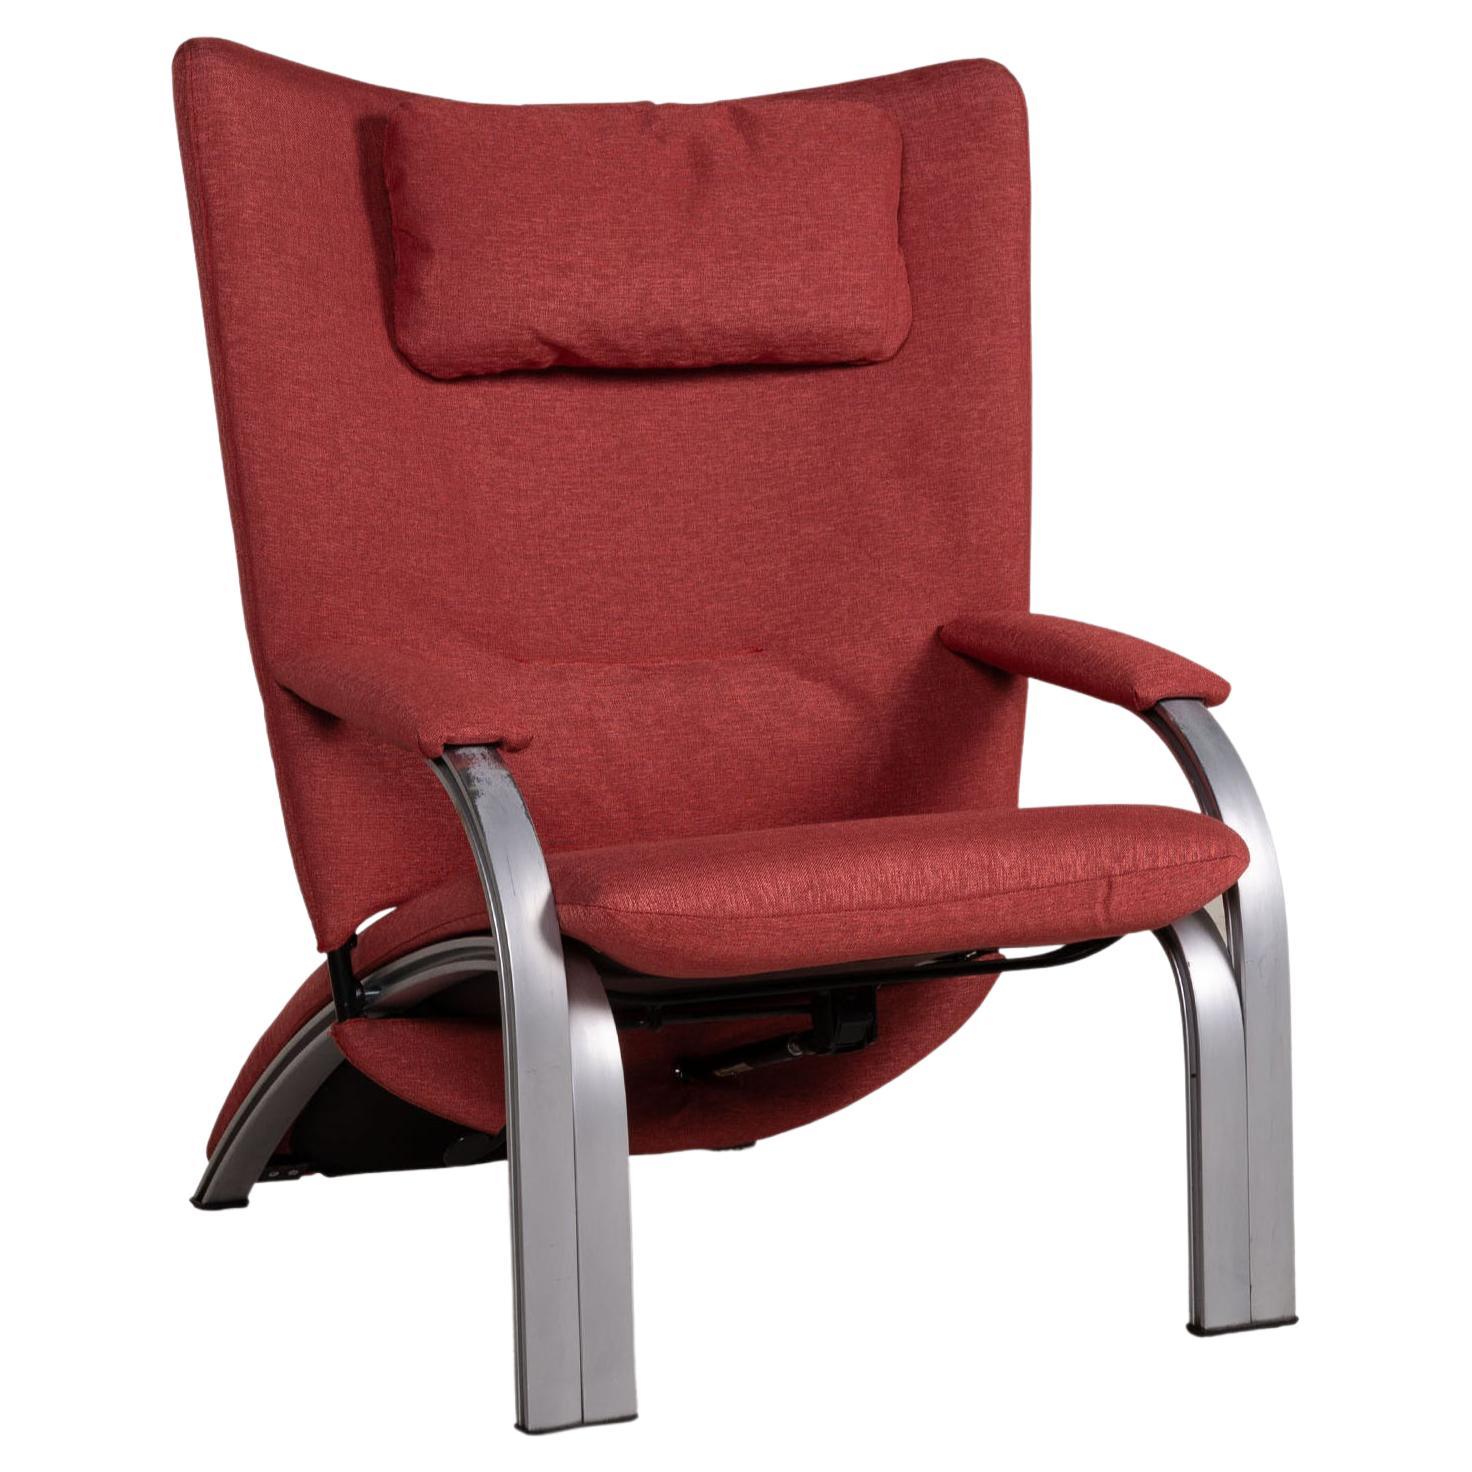 WK Wohnen Spot 698 Armchair Fabric Red Function Relaxation Function For Sale